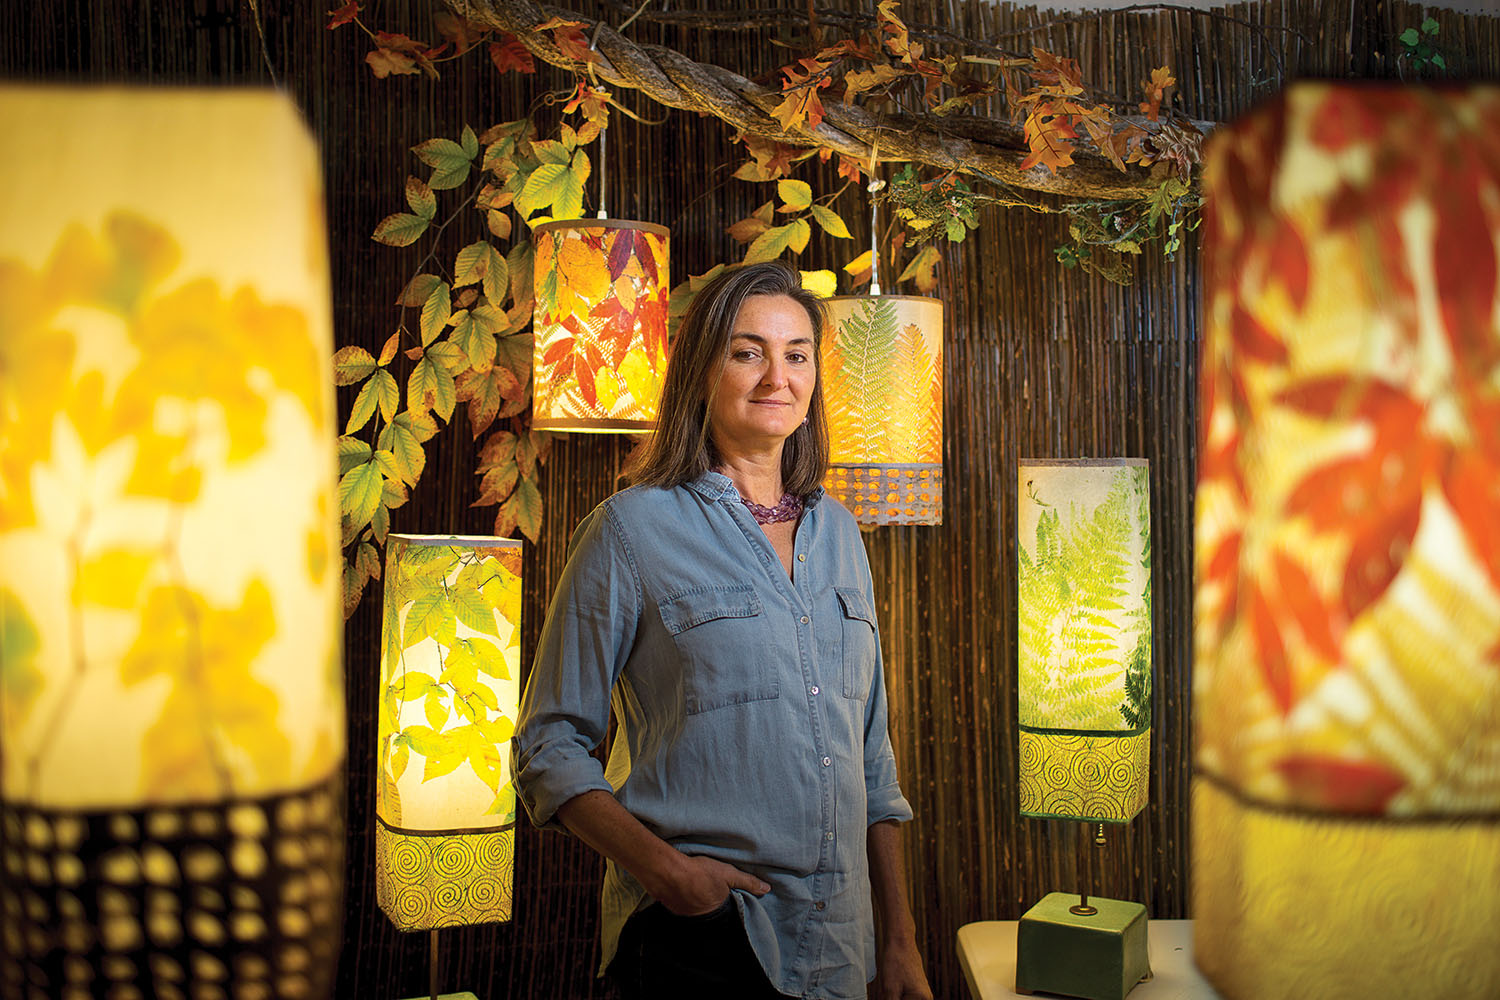 “Exploring, experimenting, and constructing” led Leah Baker to the artisanal-lamp world. Photo by Matt Rose